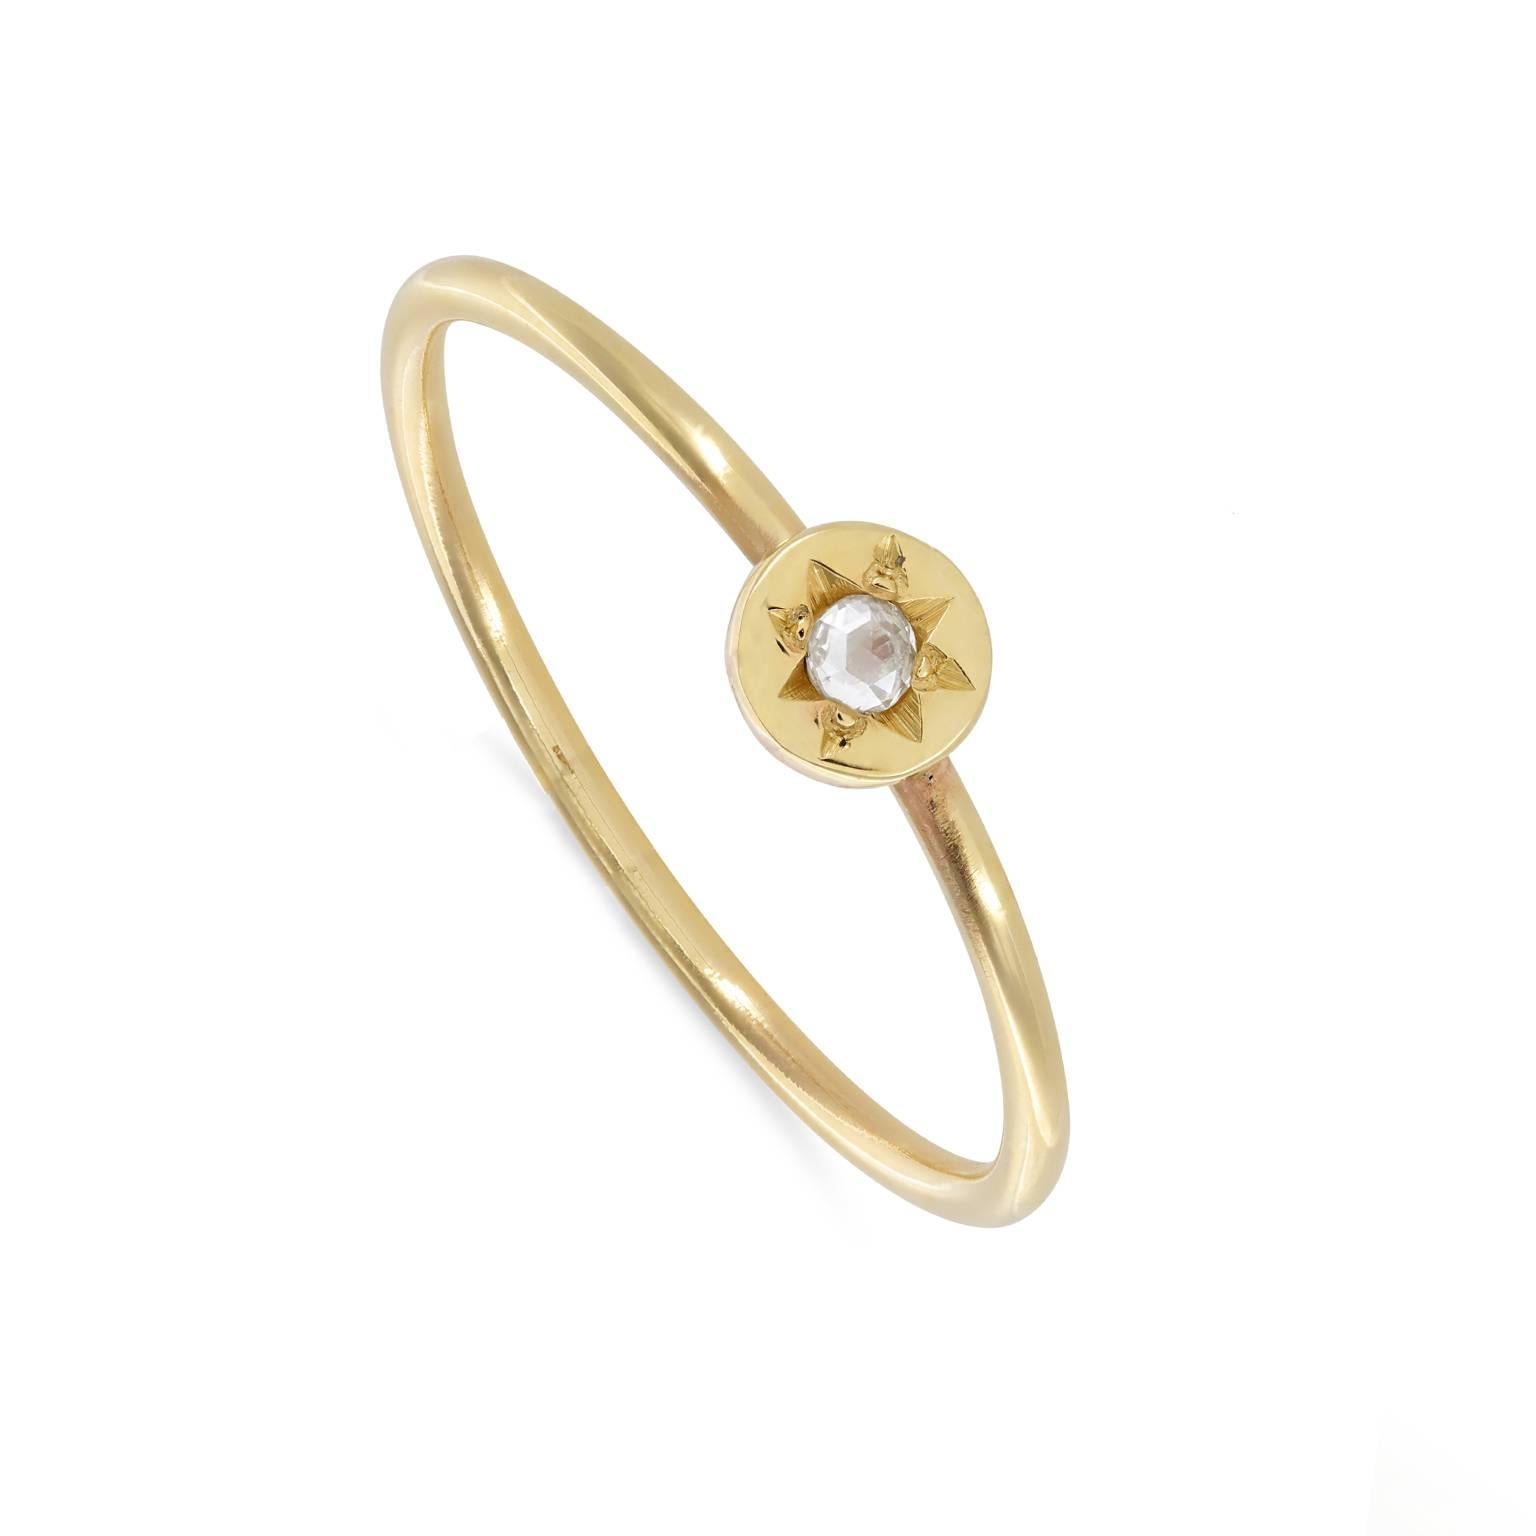 A stacking ring fit to be a promise ring, 9ct gold with a disc of gold set with a white rose cut diamond. Stack easily with your other rings or wear on its own for a simple piece of elegance.

This ring is size N (US 7) but can be resized. Please